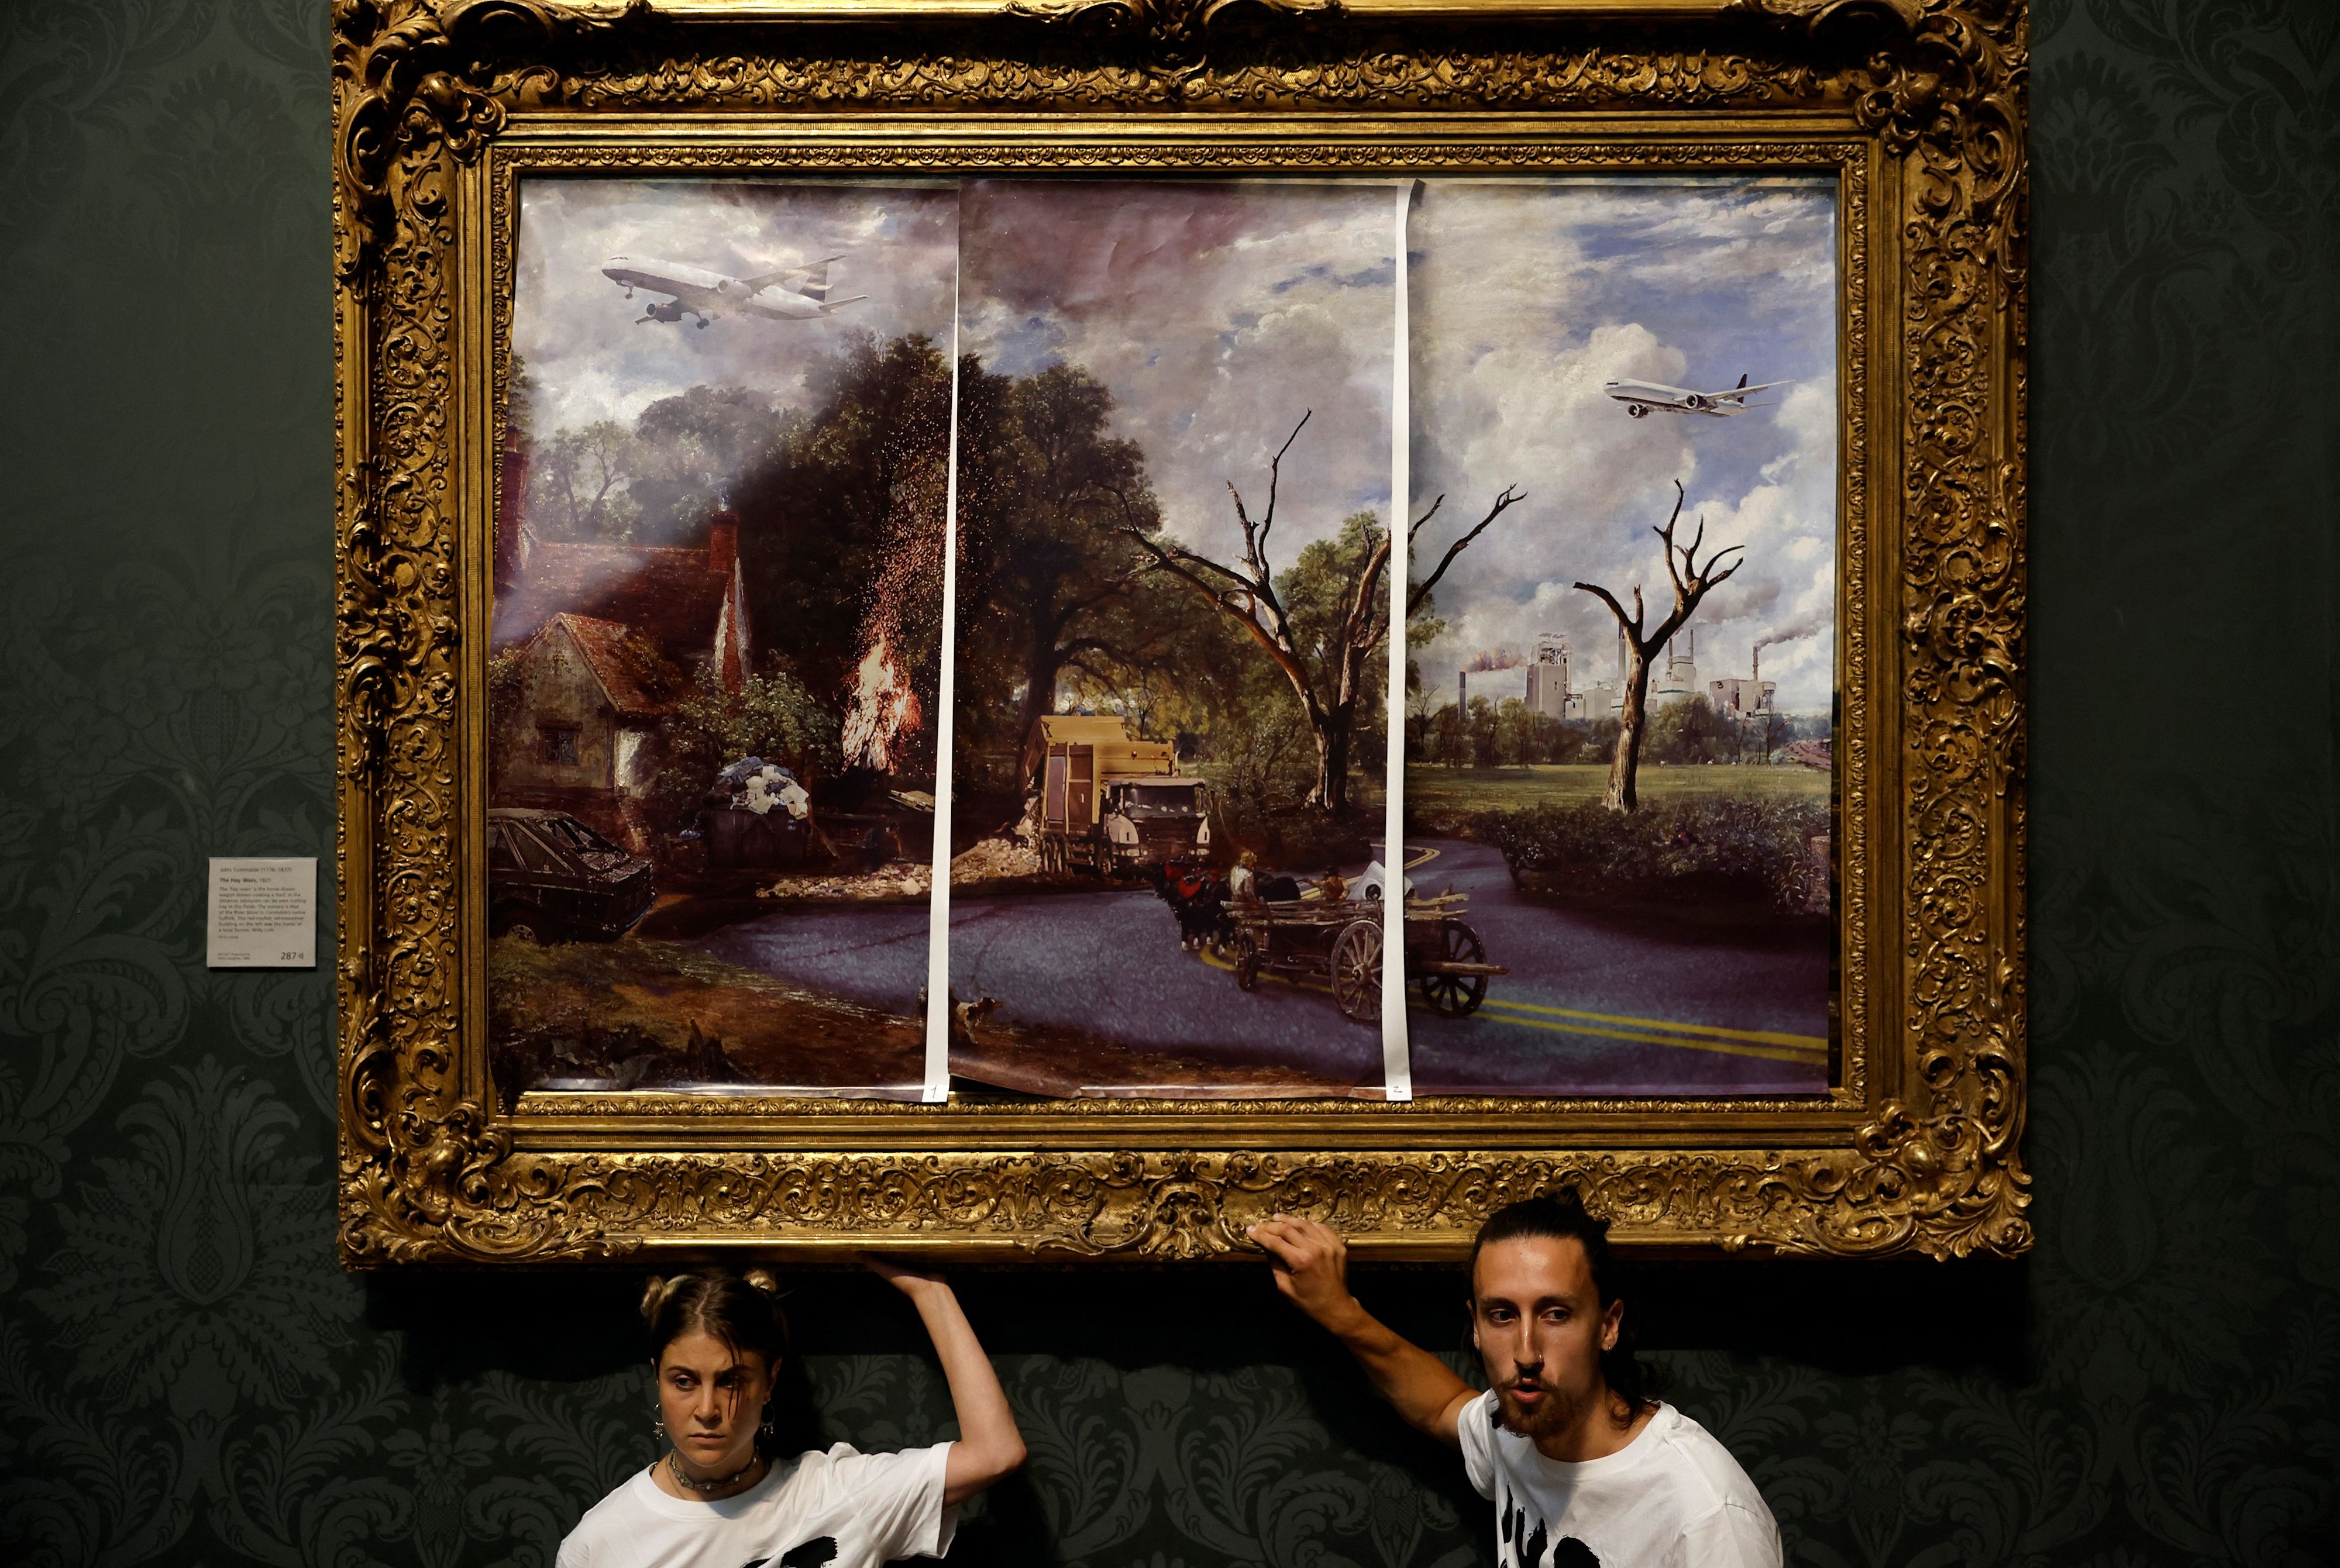 Activists from the ‘Just Stop Oil’ campaign group glued their hands to the frame of ‘The Hay Wain’ by John Constable